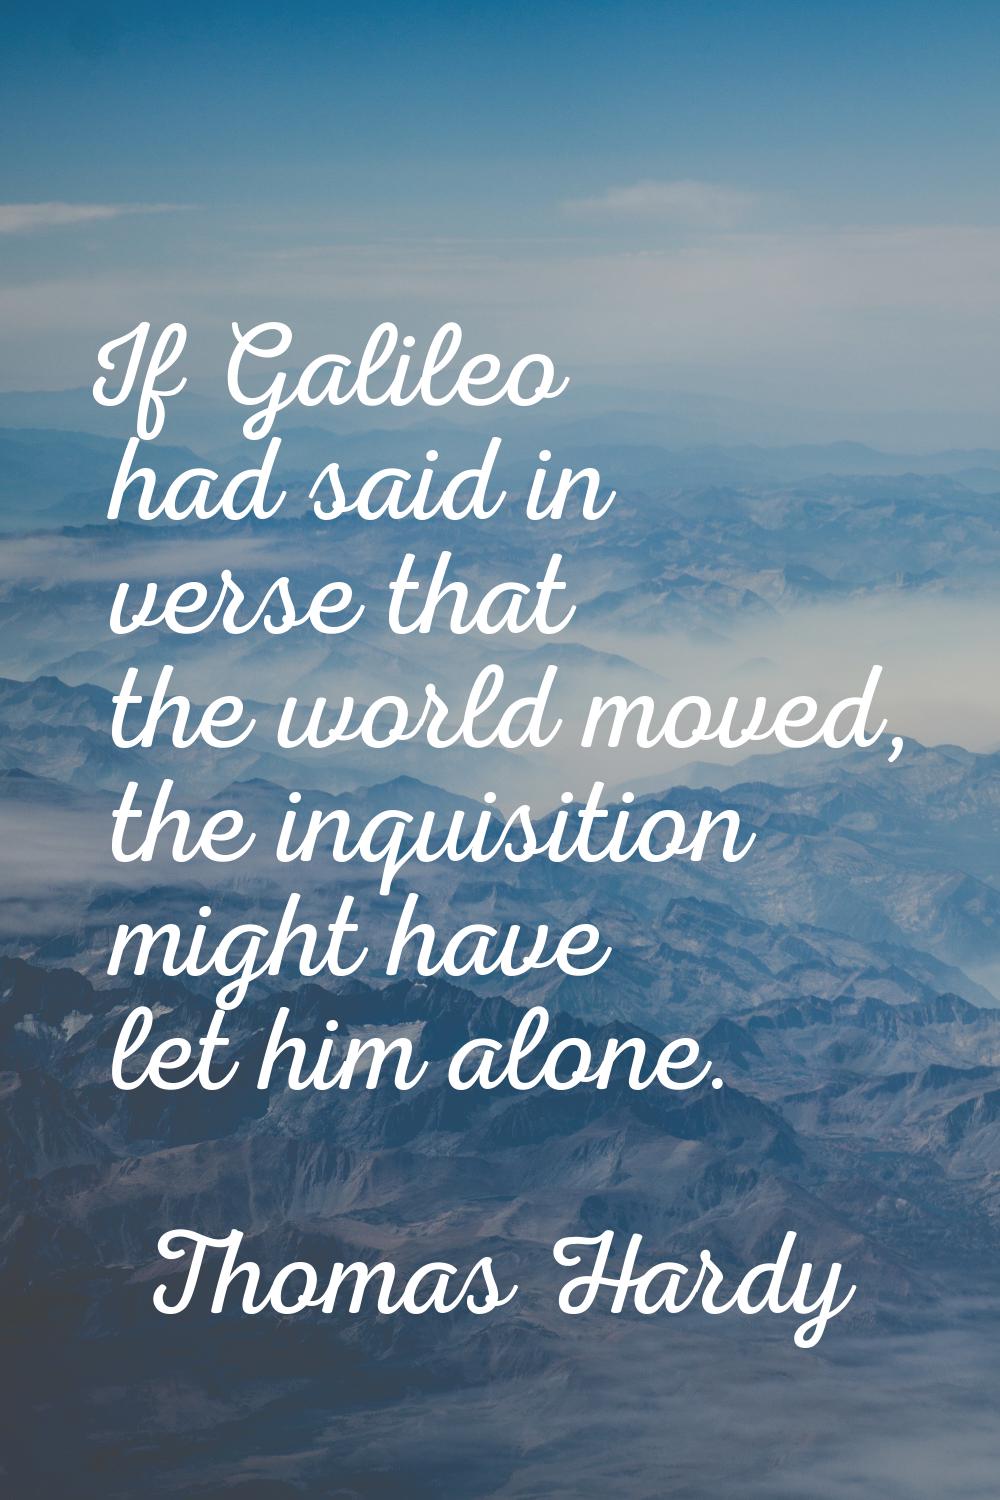 If Galileo had said in verse that the world moved, the inquisition might have let him alone.